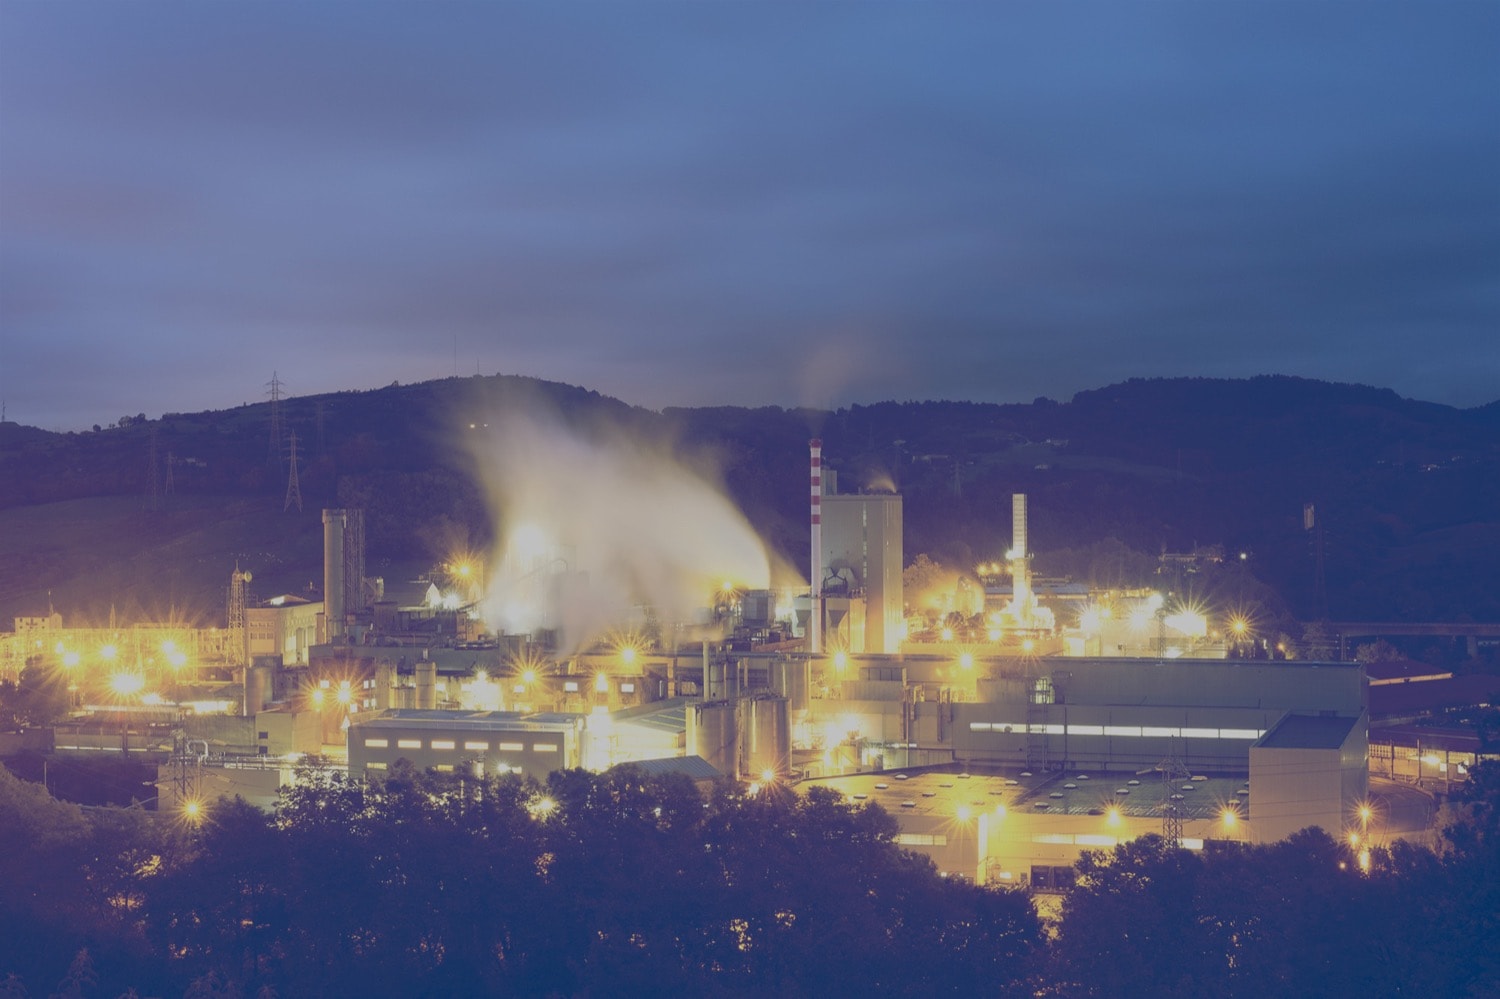 Panoramic view of an oil refinery lit up at night.